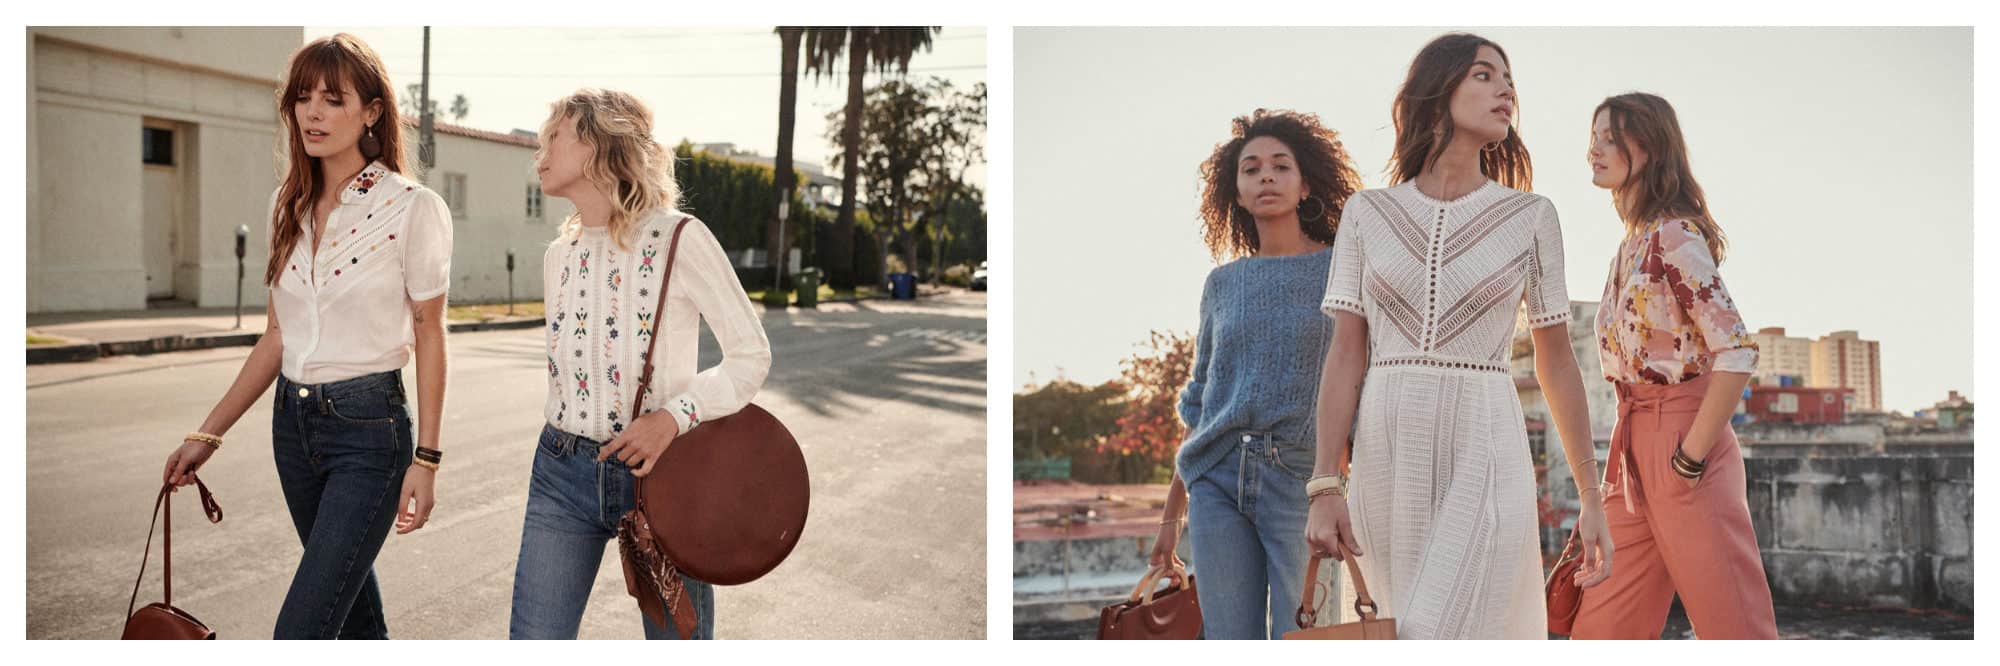 Parisian fashion brand Sézane is also know for its leather bags, like these large round pieces, as well as its well-cut white blouses (left) and dresses (right).